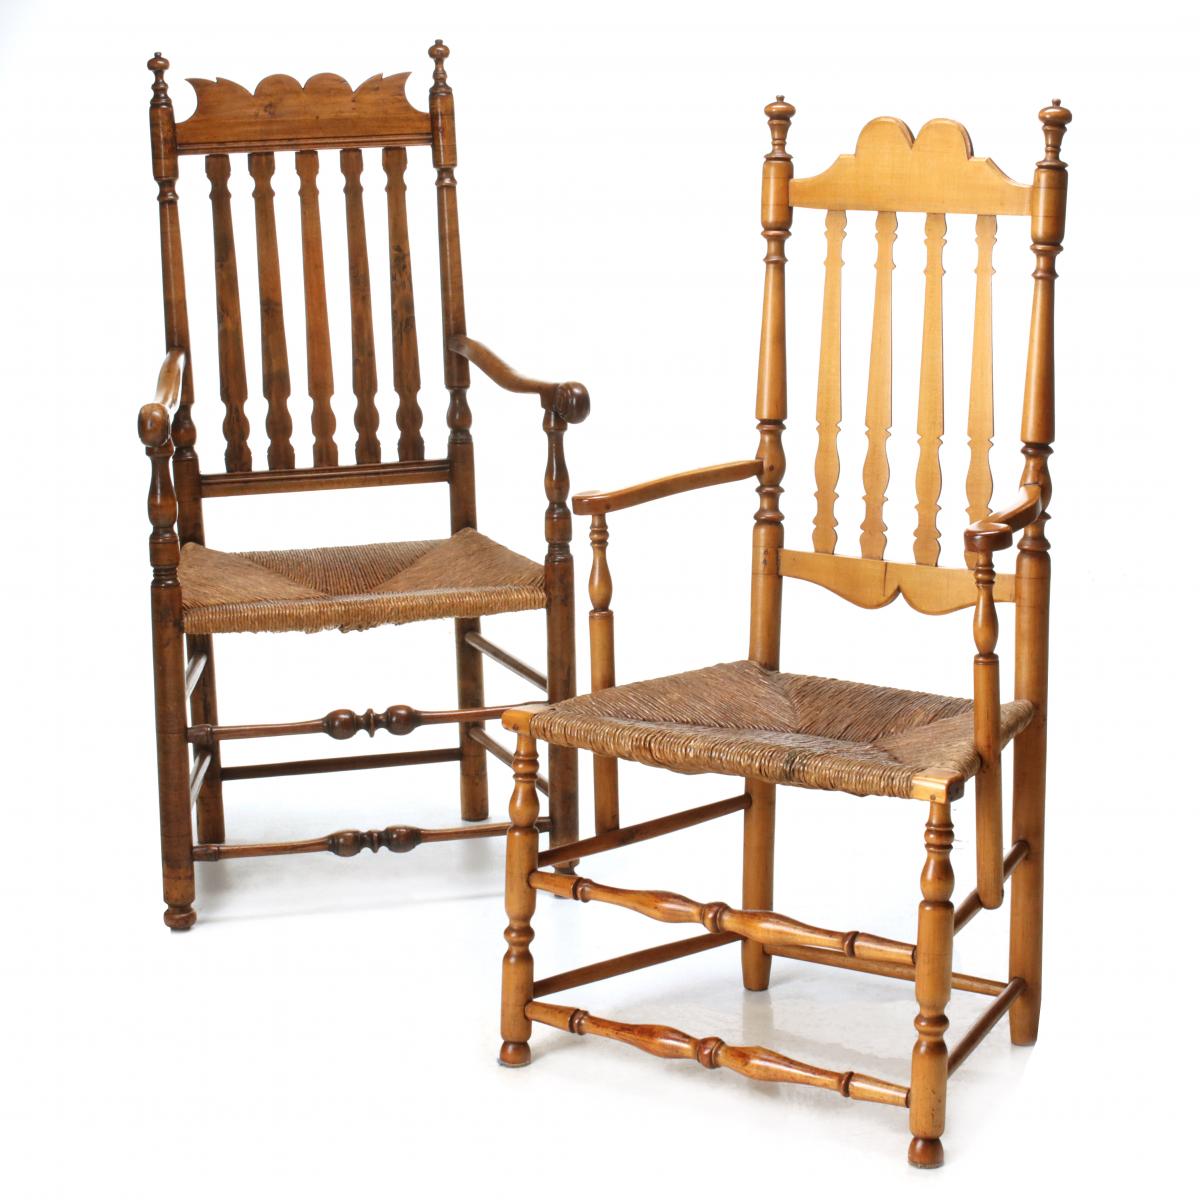 TWO RESTORED 18TH C. AMERICAN BANNISTER BACK CHAIRS